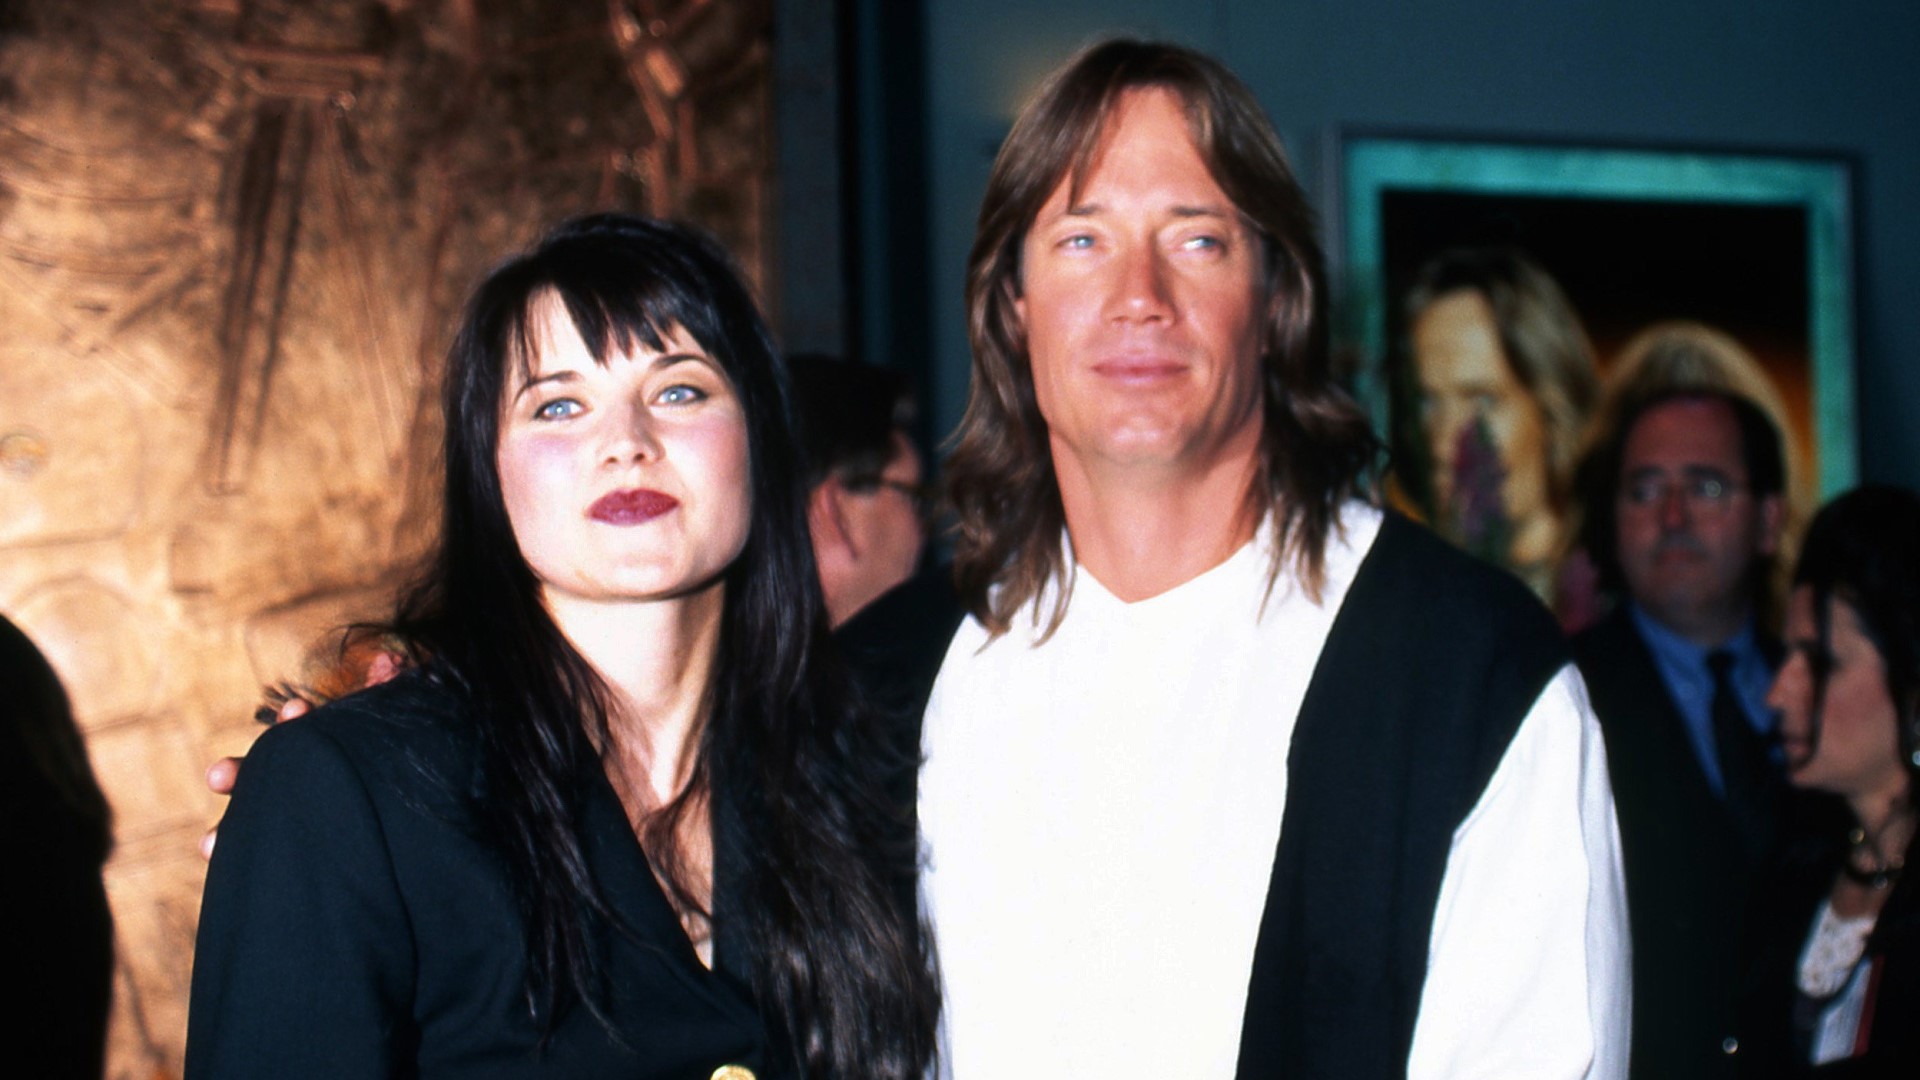 Hercules actor Kevin Sorbo complains that Hollywood is 'not masculine anymore'